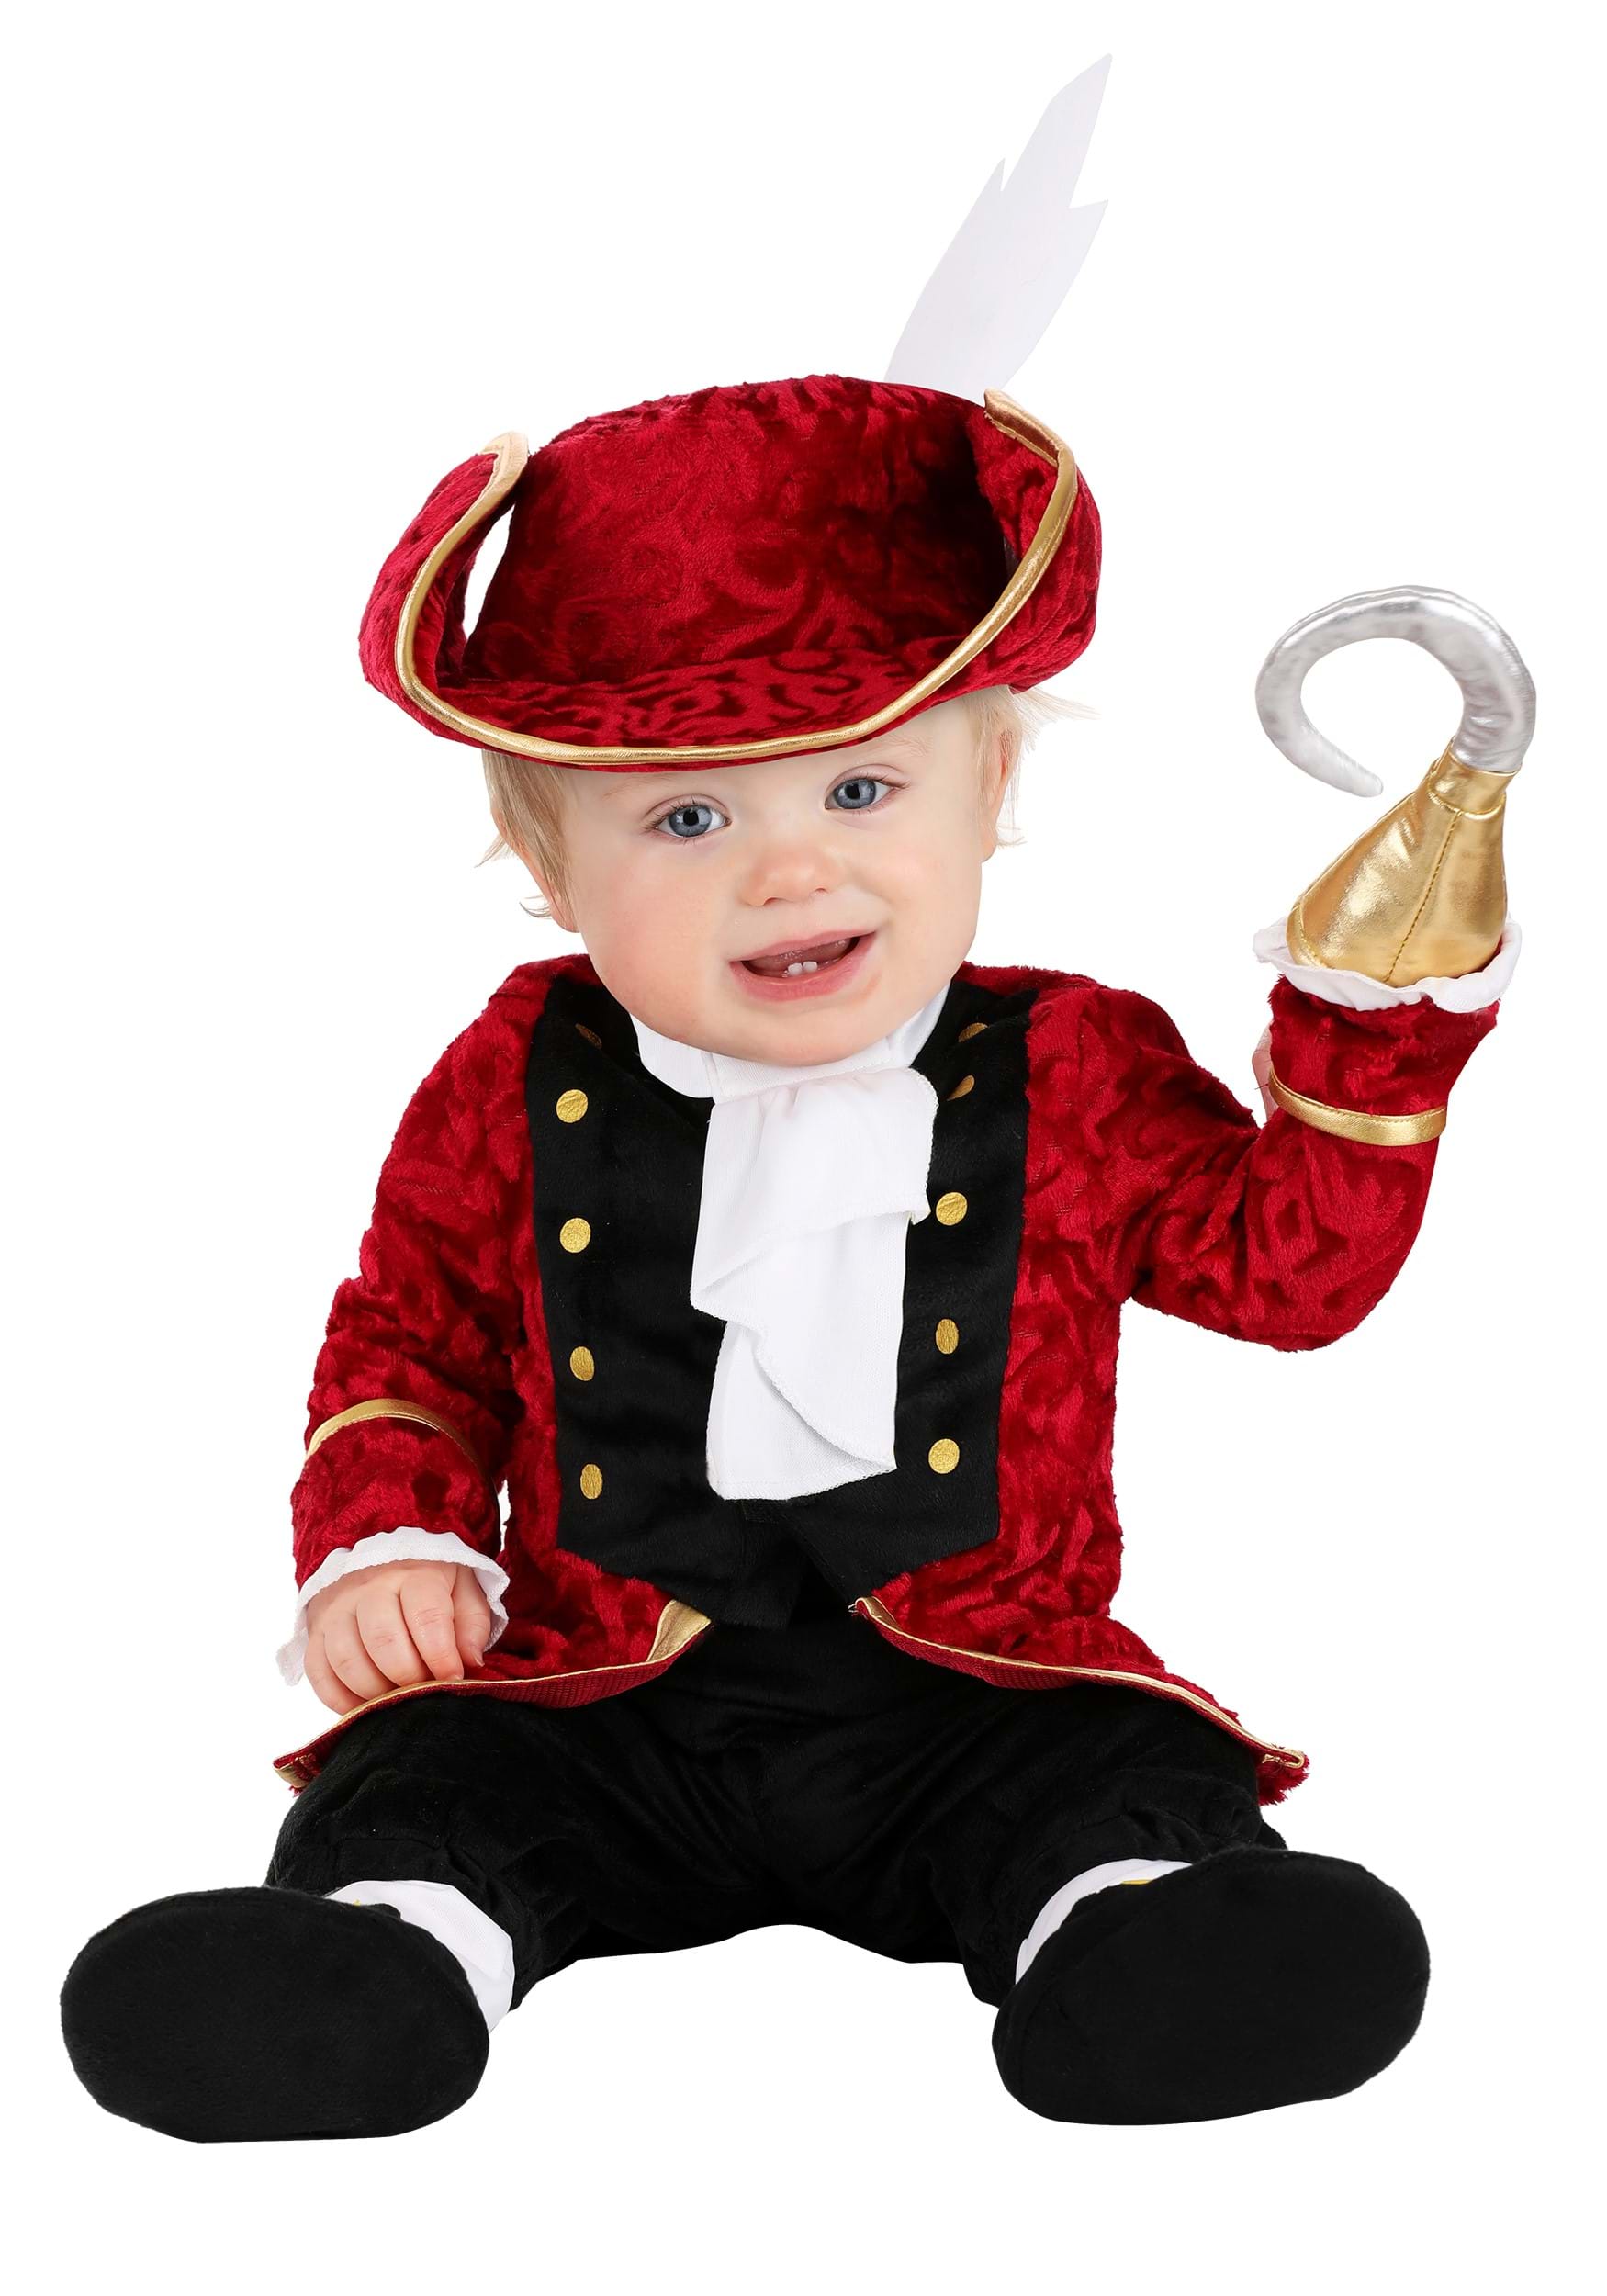 12-18 Months Charming Captain Hook Infant Costume, Black/White/Red